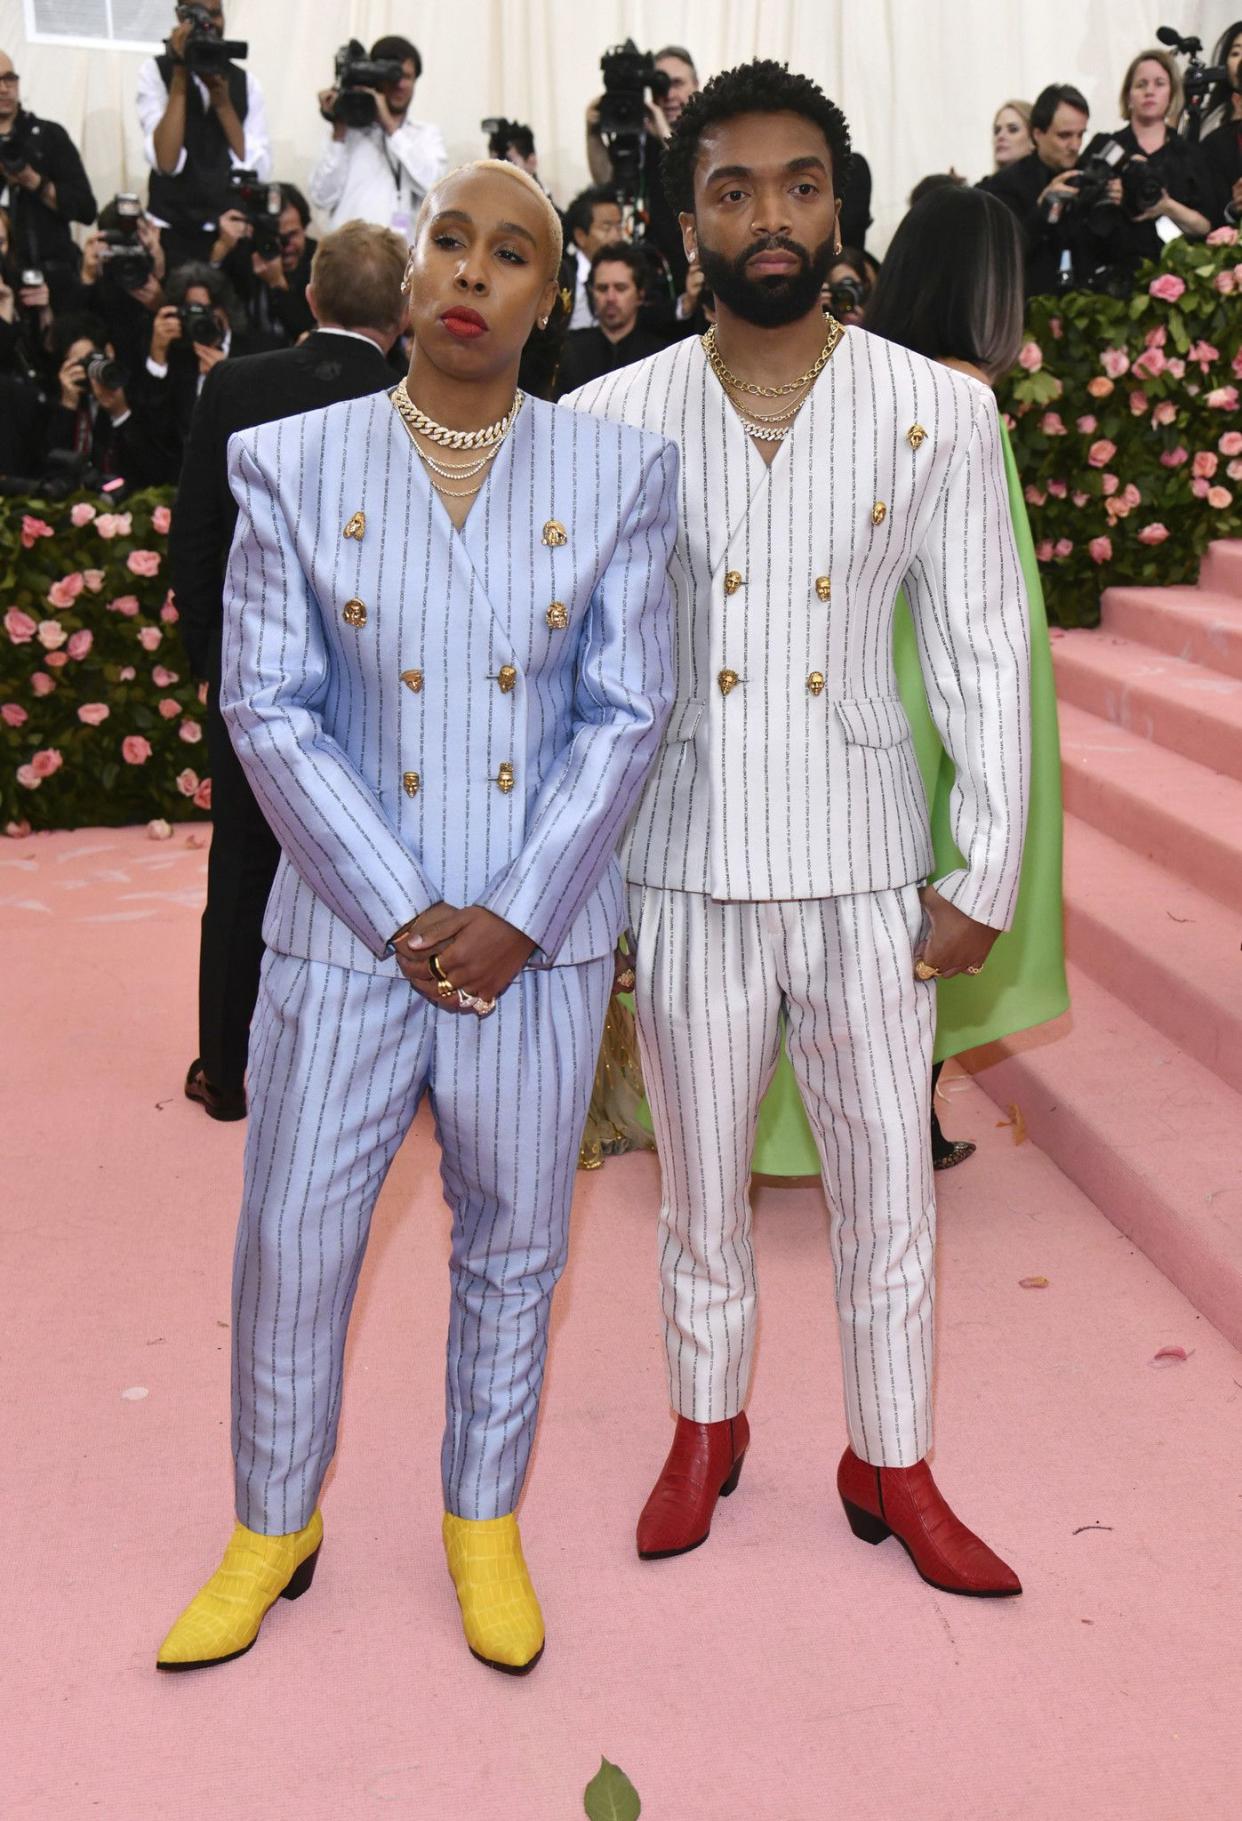 Lena Waithe, left, and designer Kerby Jean-Raymond attend The Metropolitan Museum of Art's Costume Institute benefit gala celebrating the opening of the "Camp: Notes on Fashion" exhibition on Monday, May 6, 2019, in New York.